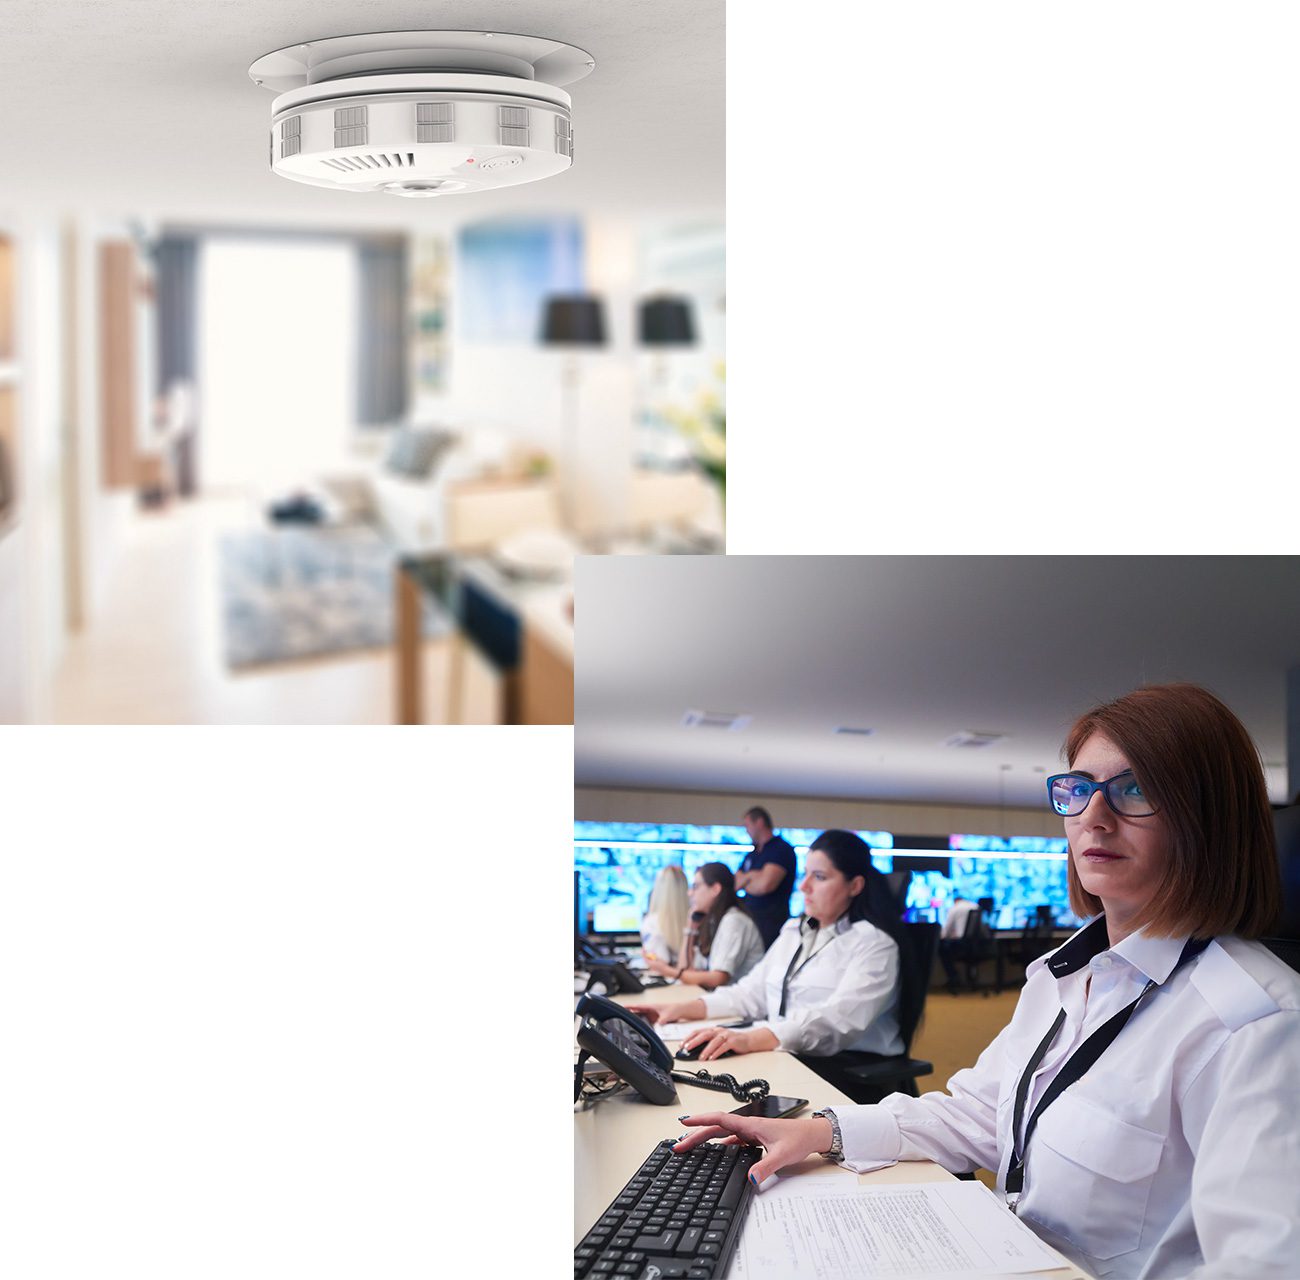 customer service support checking in residential fire alarm system monitoring